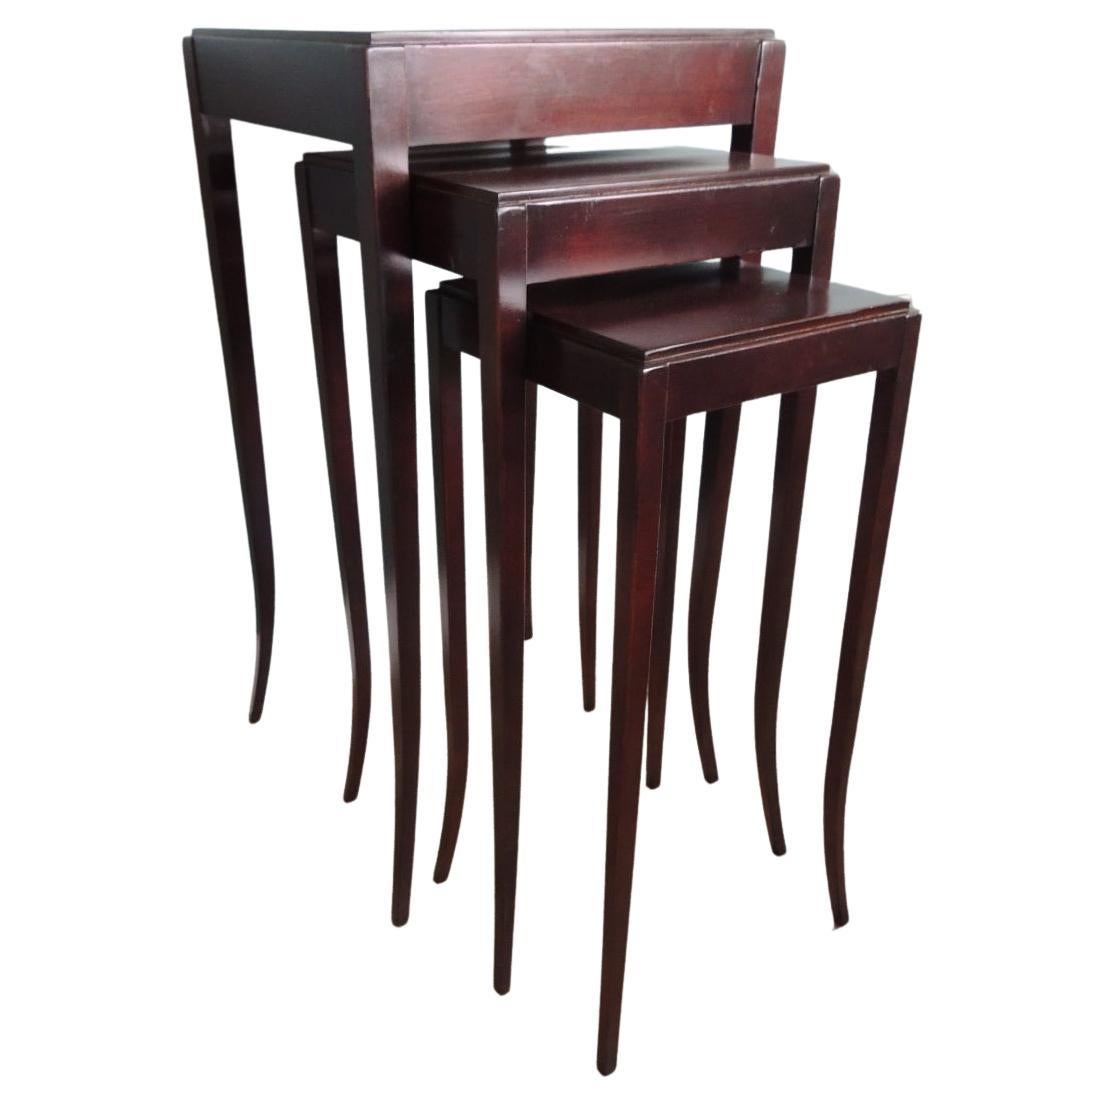 Set of '3' Nesting Tables by Barbara Barry for Baker Furniture